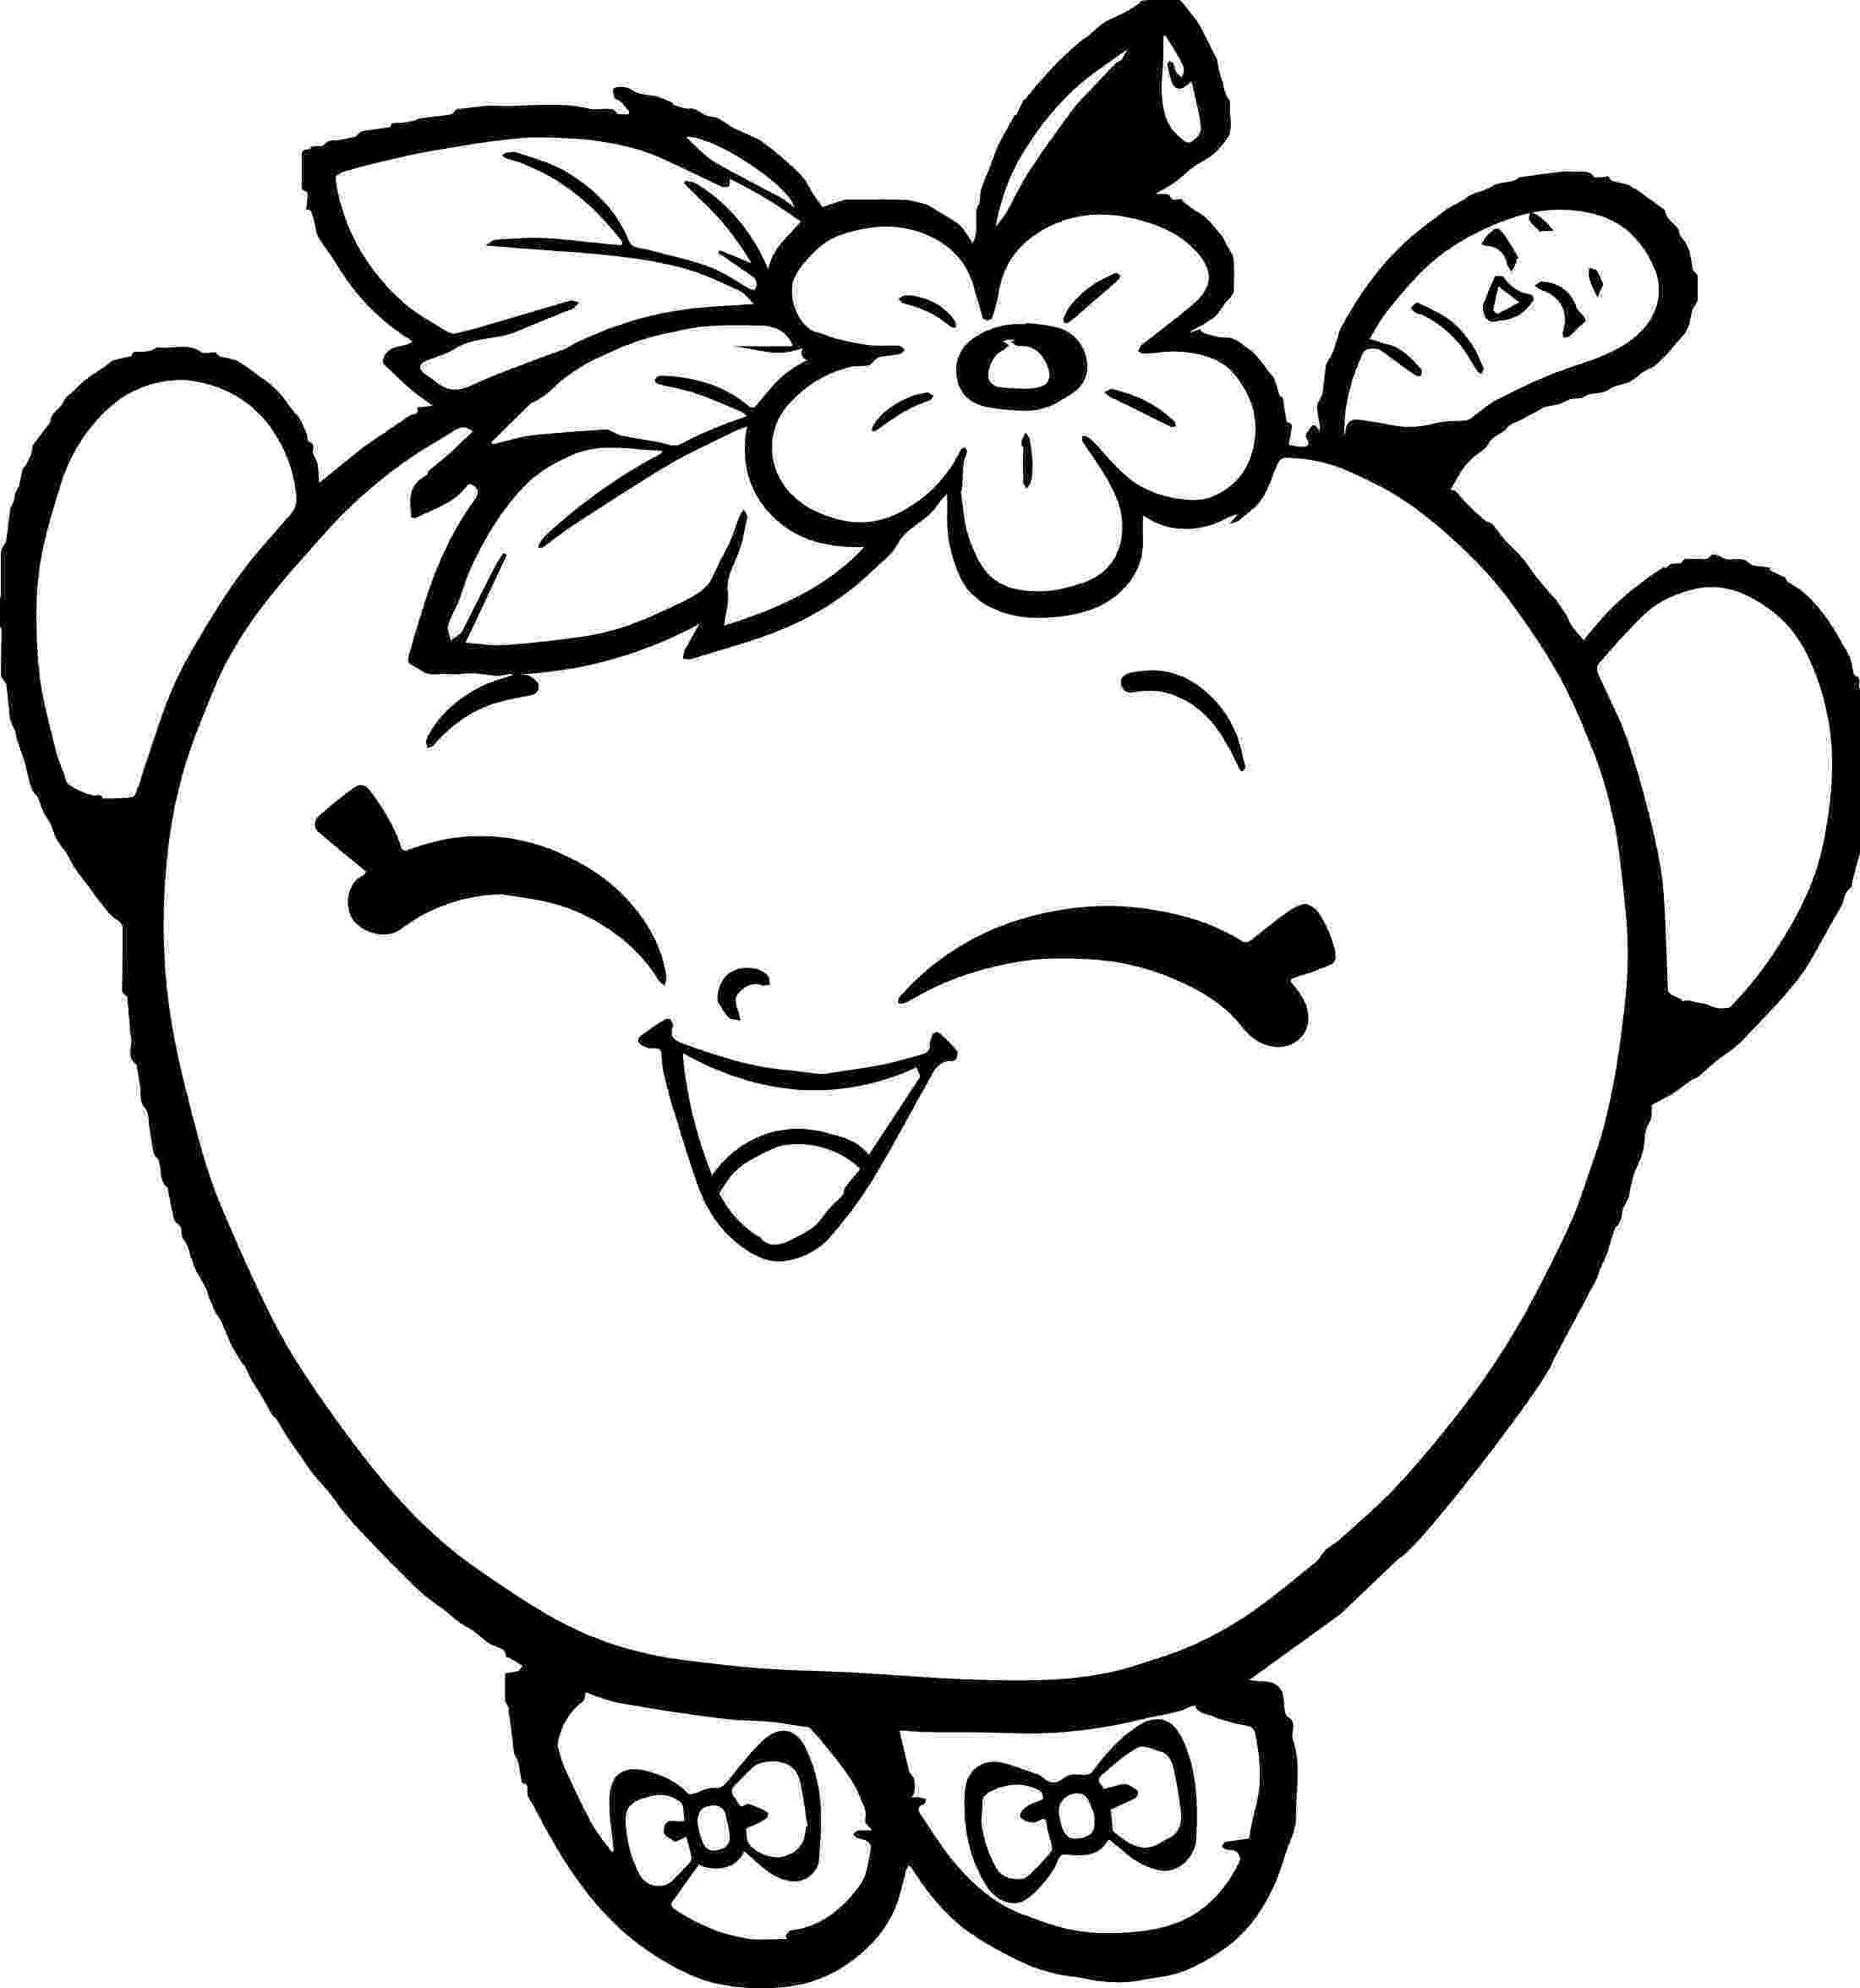 apple blossom coloring page page coloring apple blossom page coloring apple blossom 